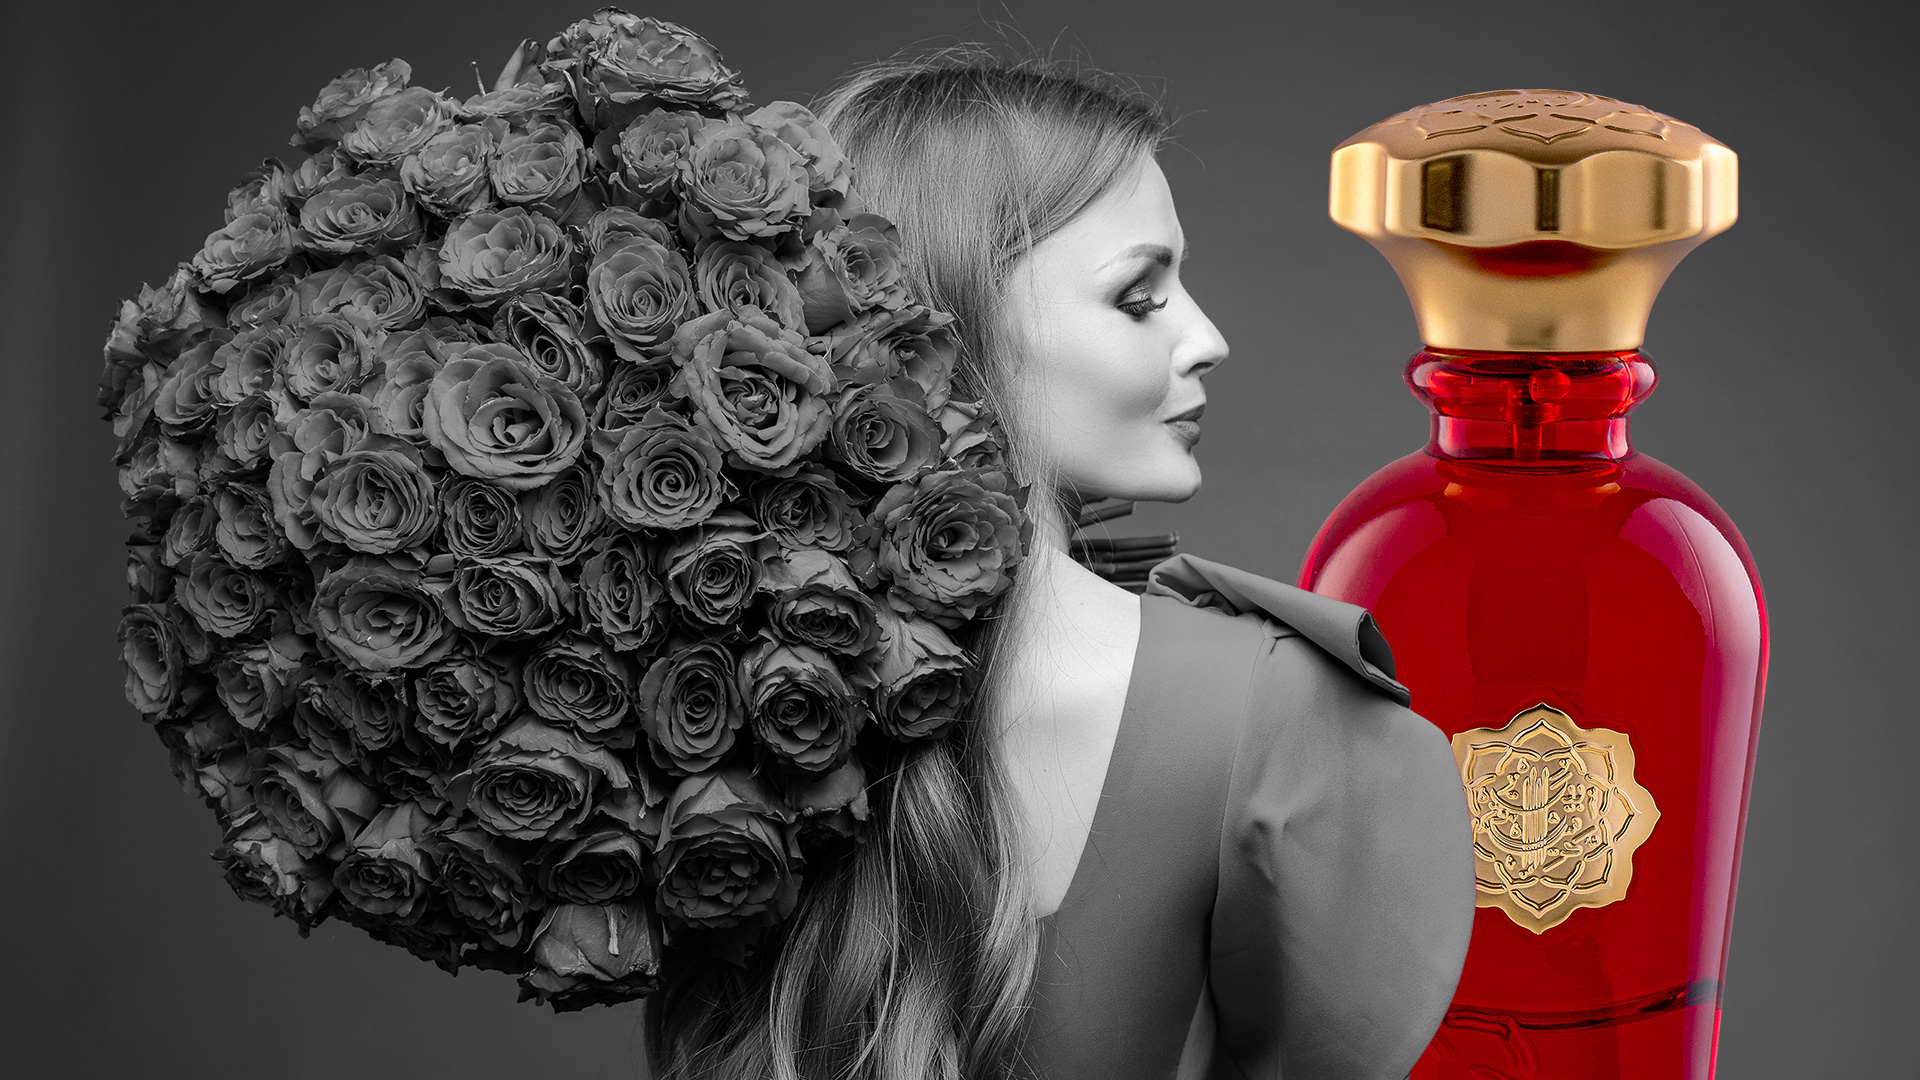 Make a Lasting Impression with This Amazing Long-Lasting Perfume for Women